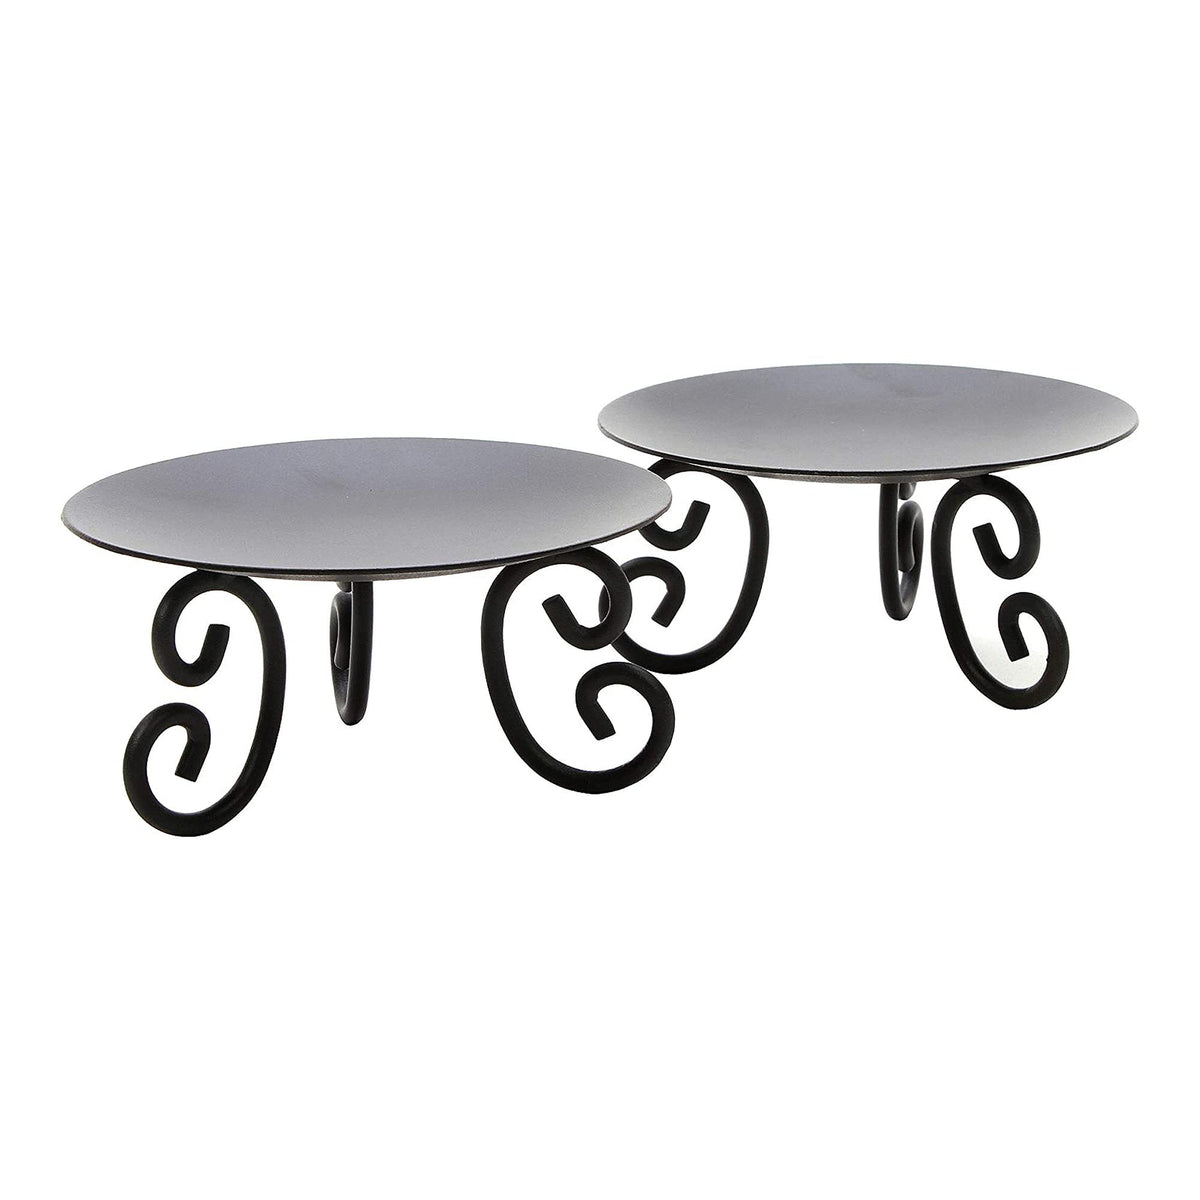 HOSLEY® Metal Pillar Candle Holder, Set of 2, 5 inches Diameter each